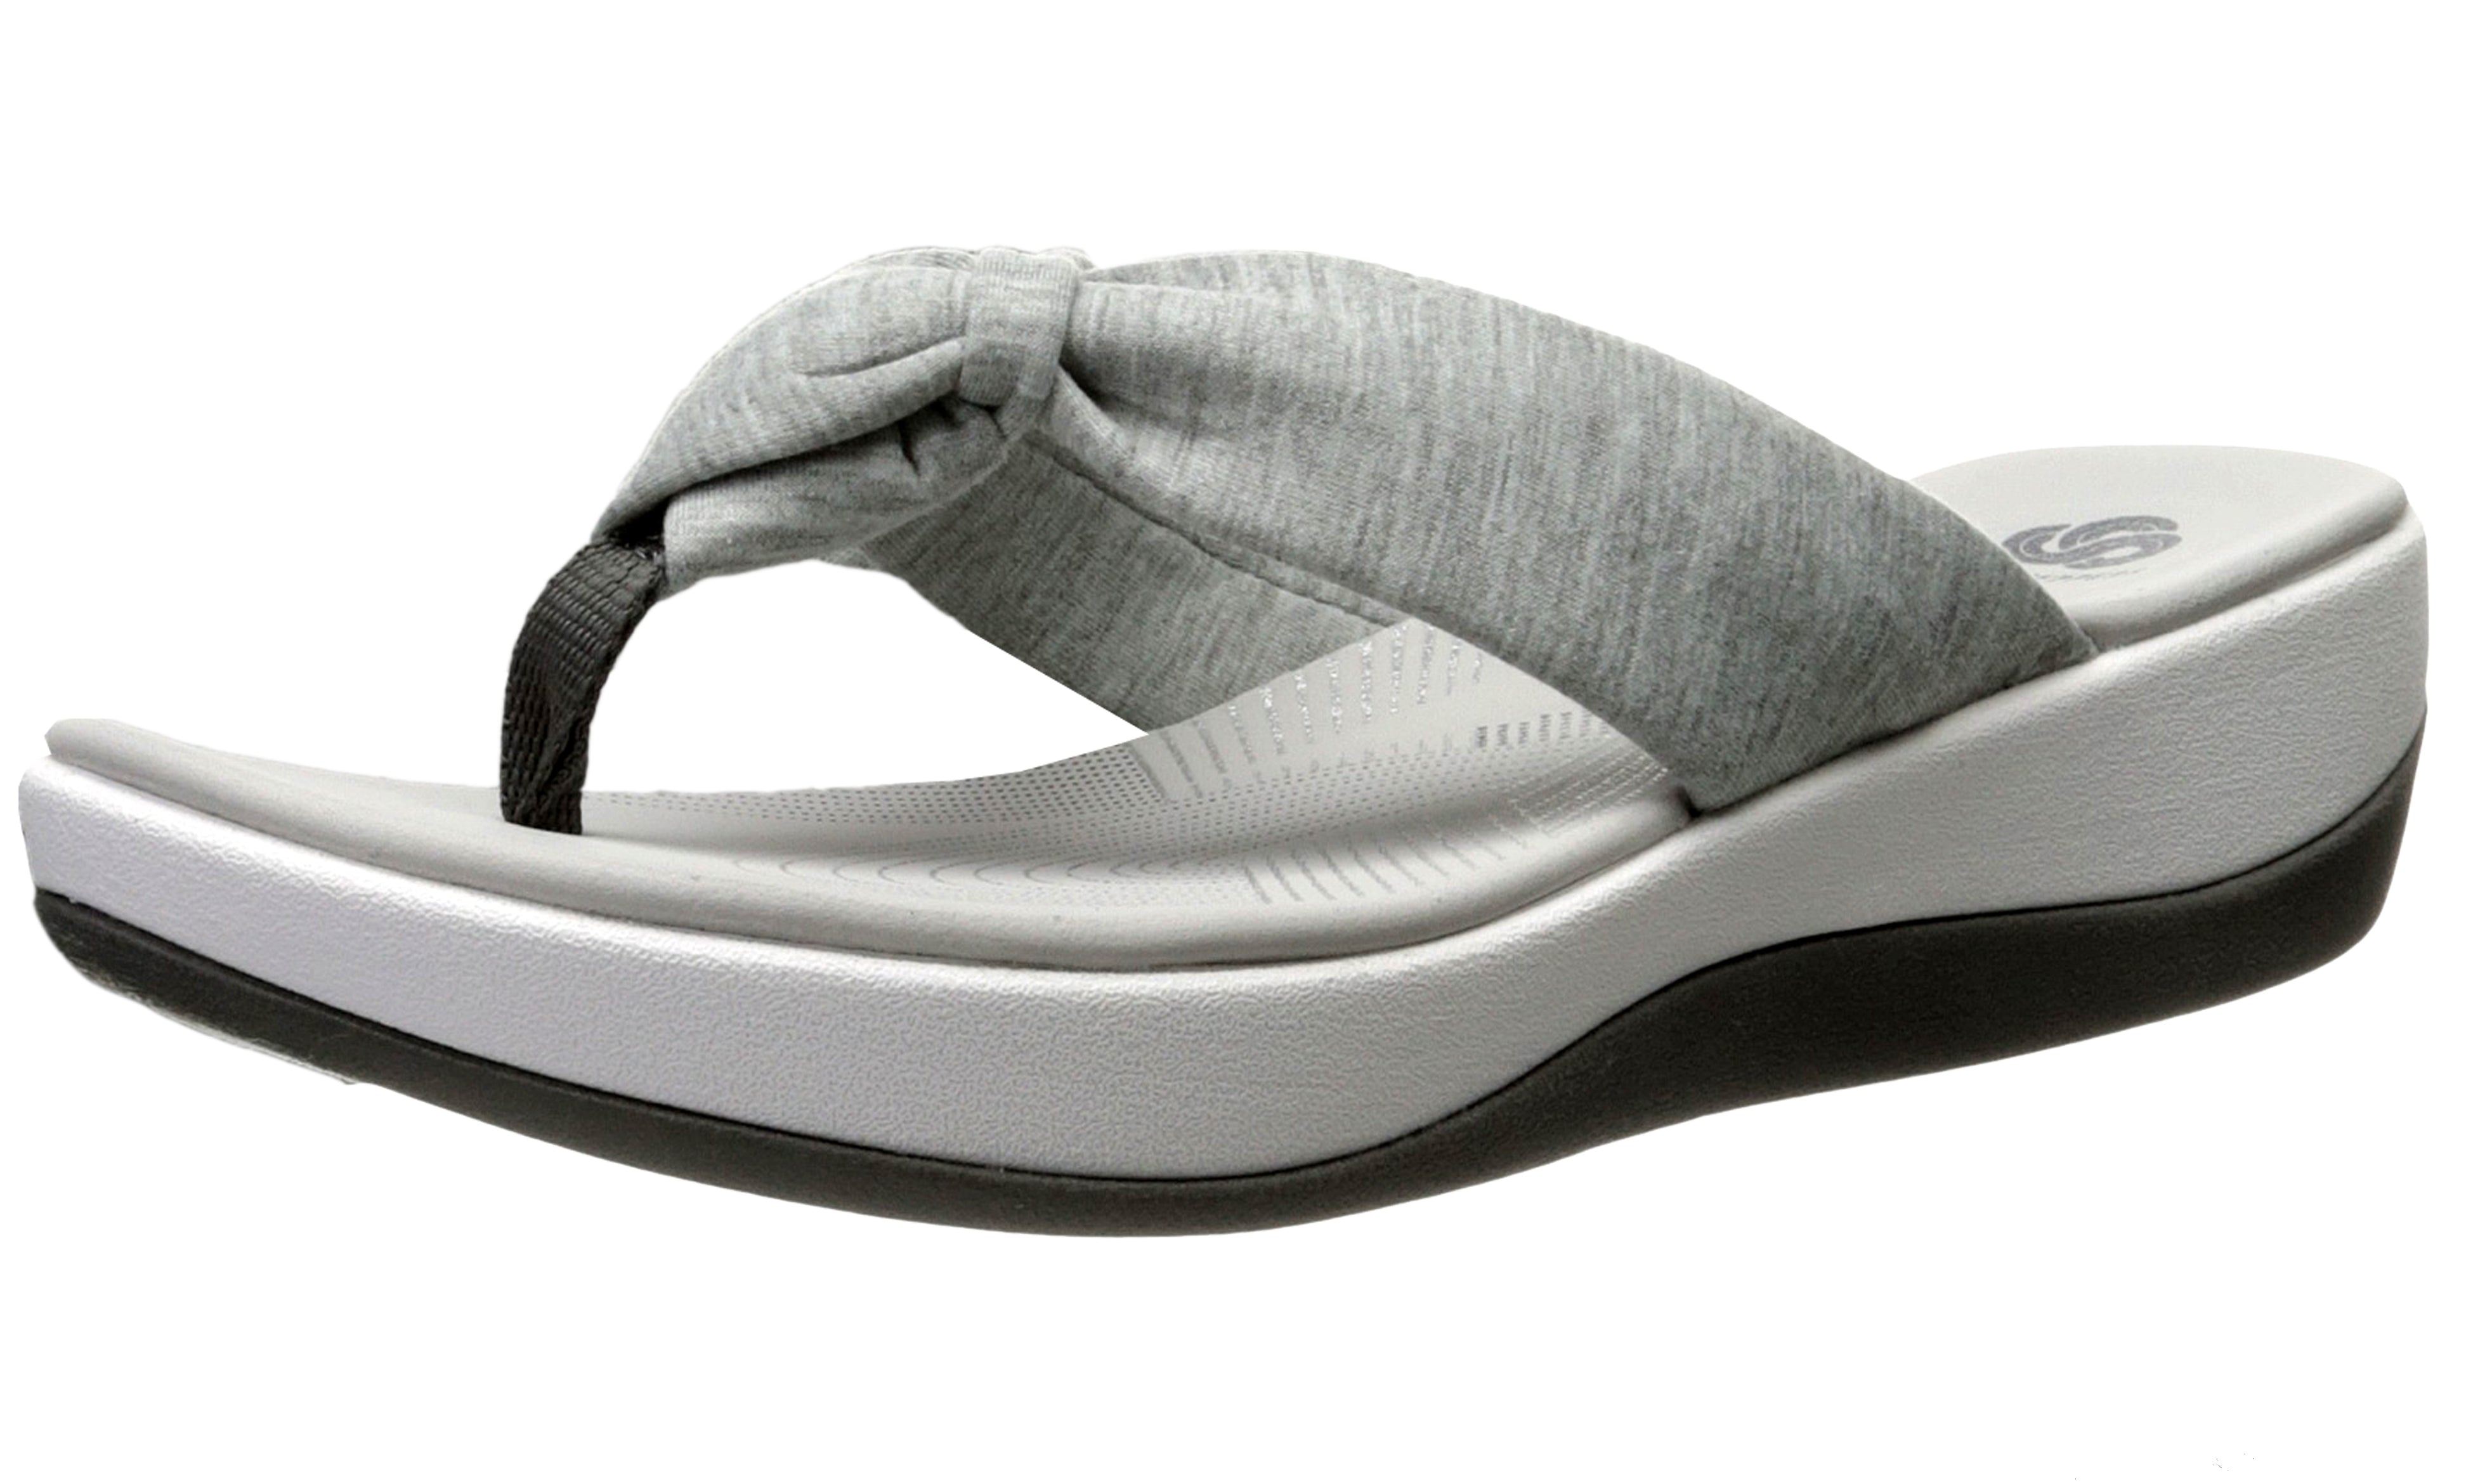 Arla Glison Thong Sandals with Arch Support - Womens | Shoe City